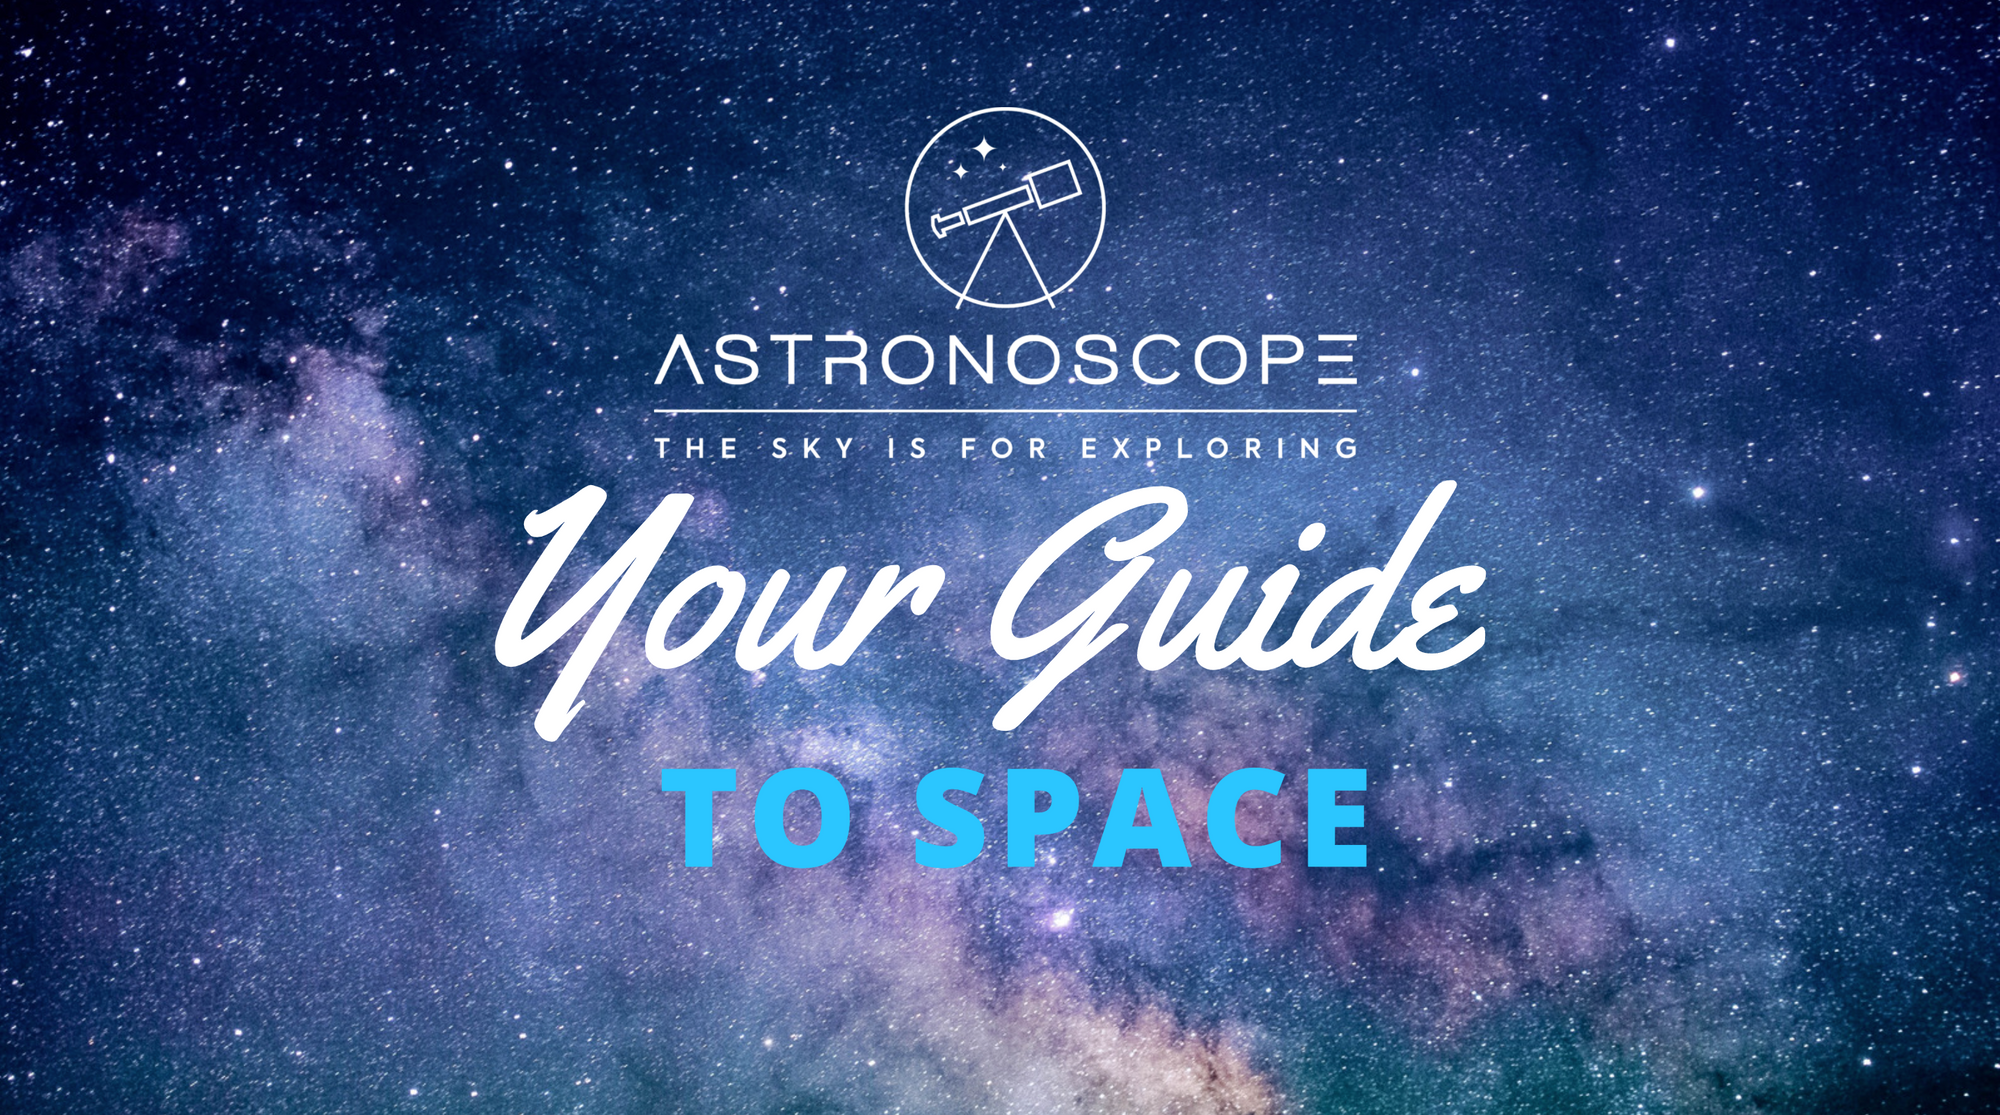 If you are a novice astronomer beginning your voyage into the mesmerising universe then Astronoscope is for you